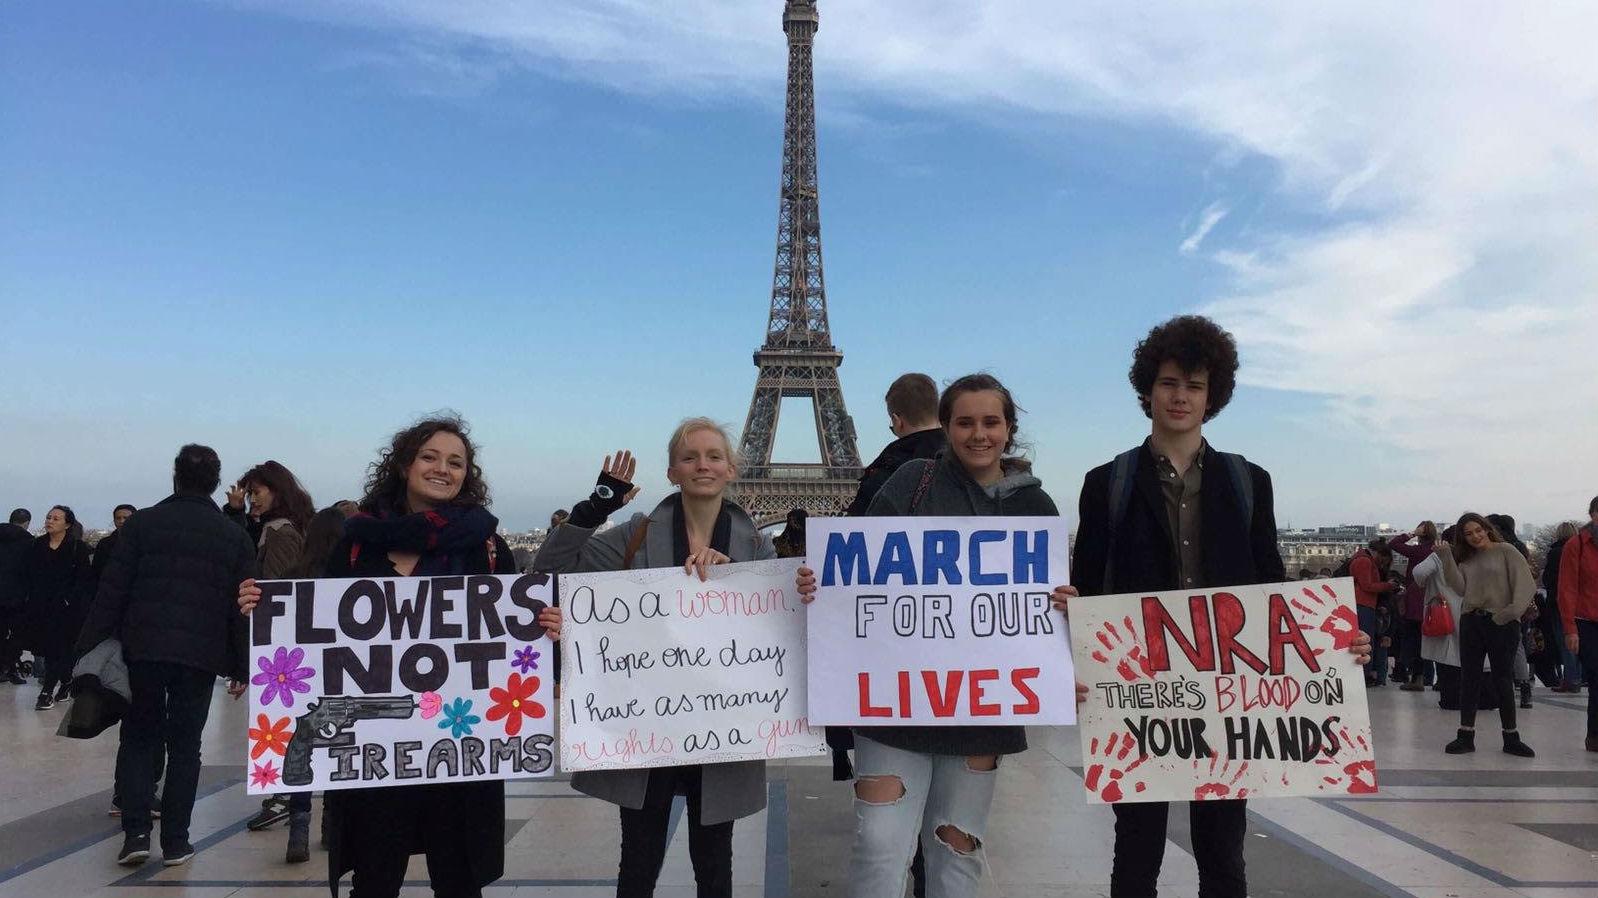 American and French students hold signs in front of the Eiffel Tower in Paris in support of March for Our Lives.